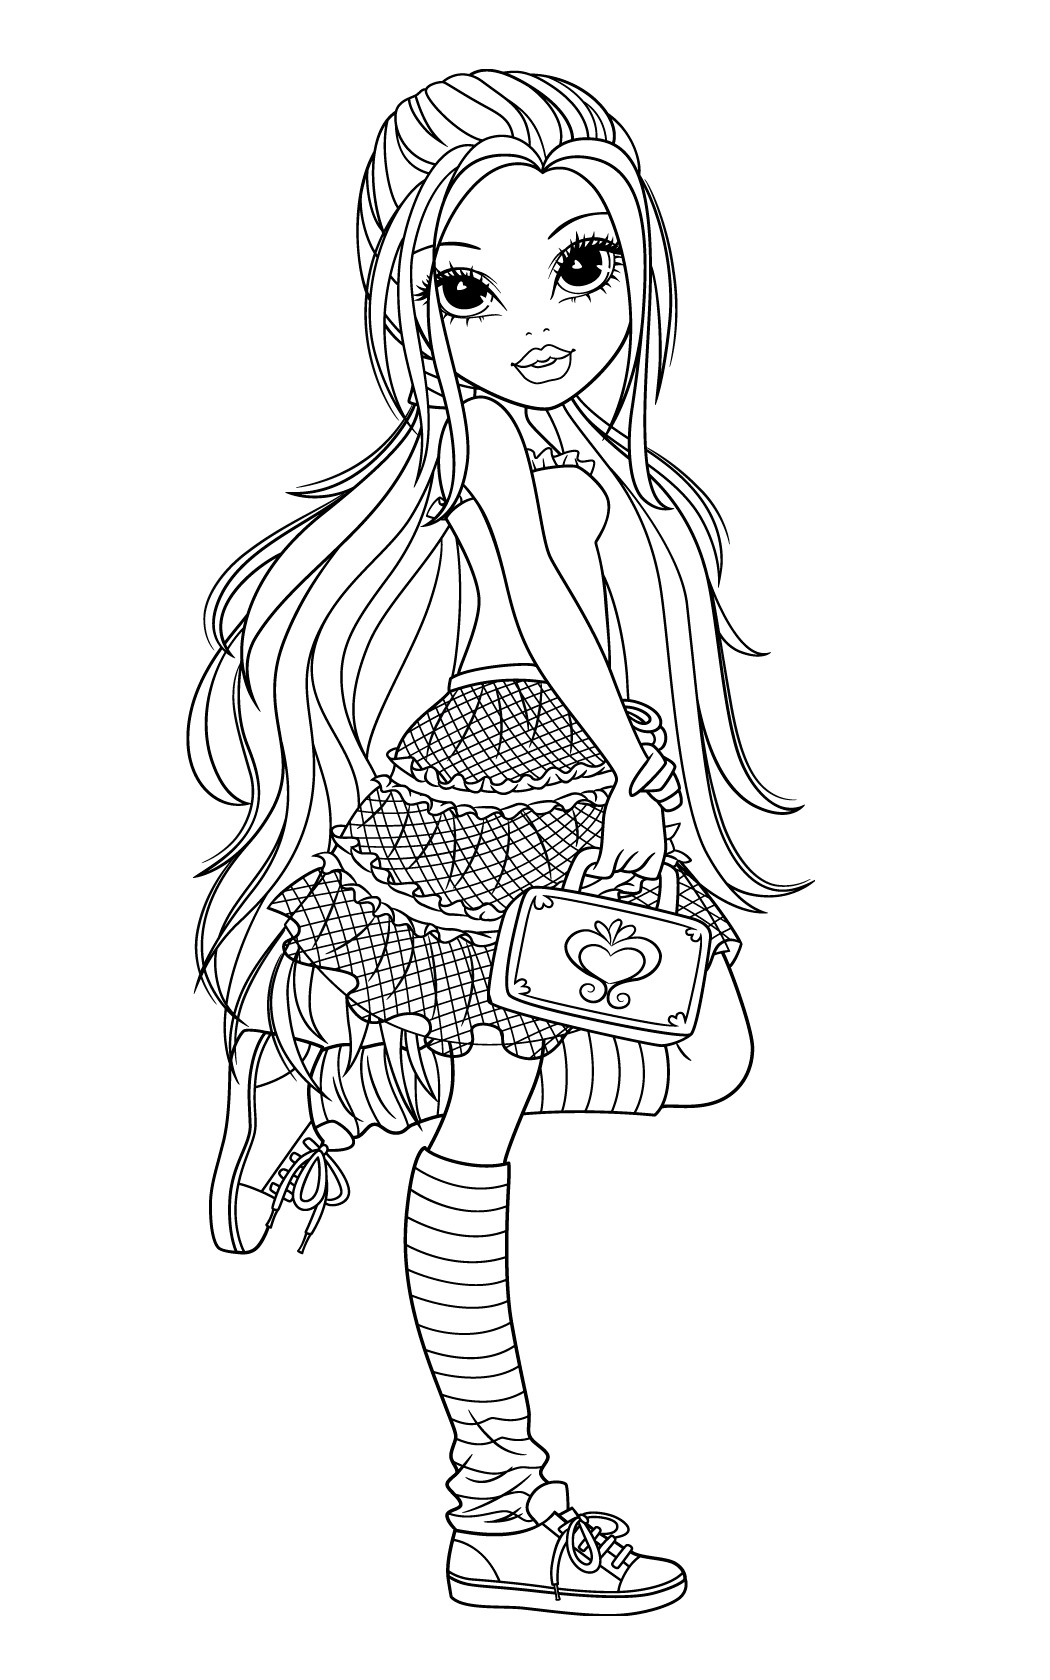 Online Printable Coloring Pages For Girls
 New Moxie Girlz Coloring Pages will be added frequently so